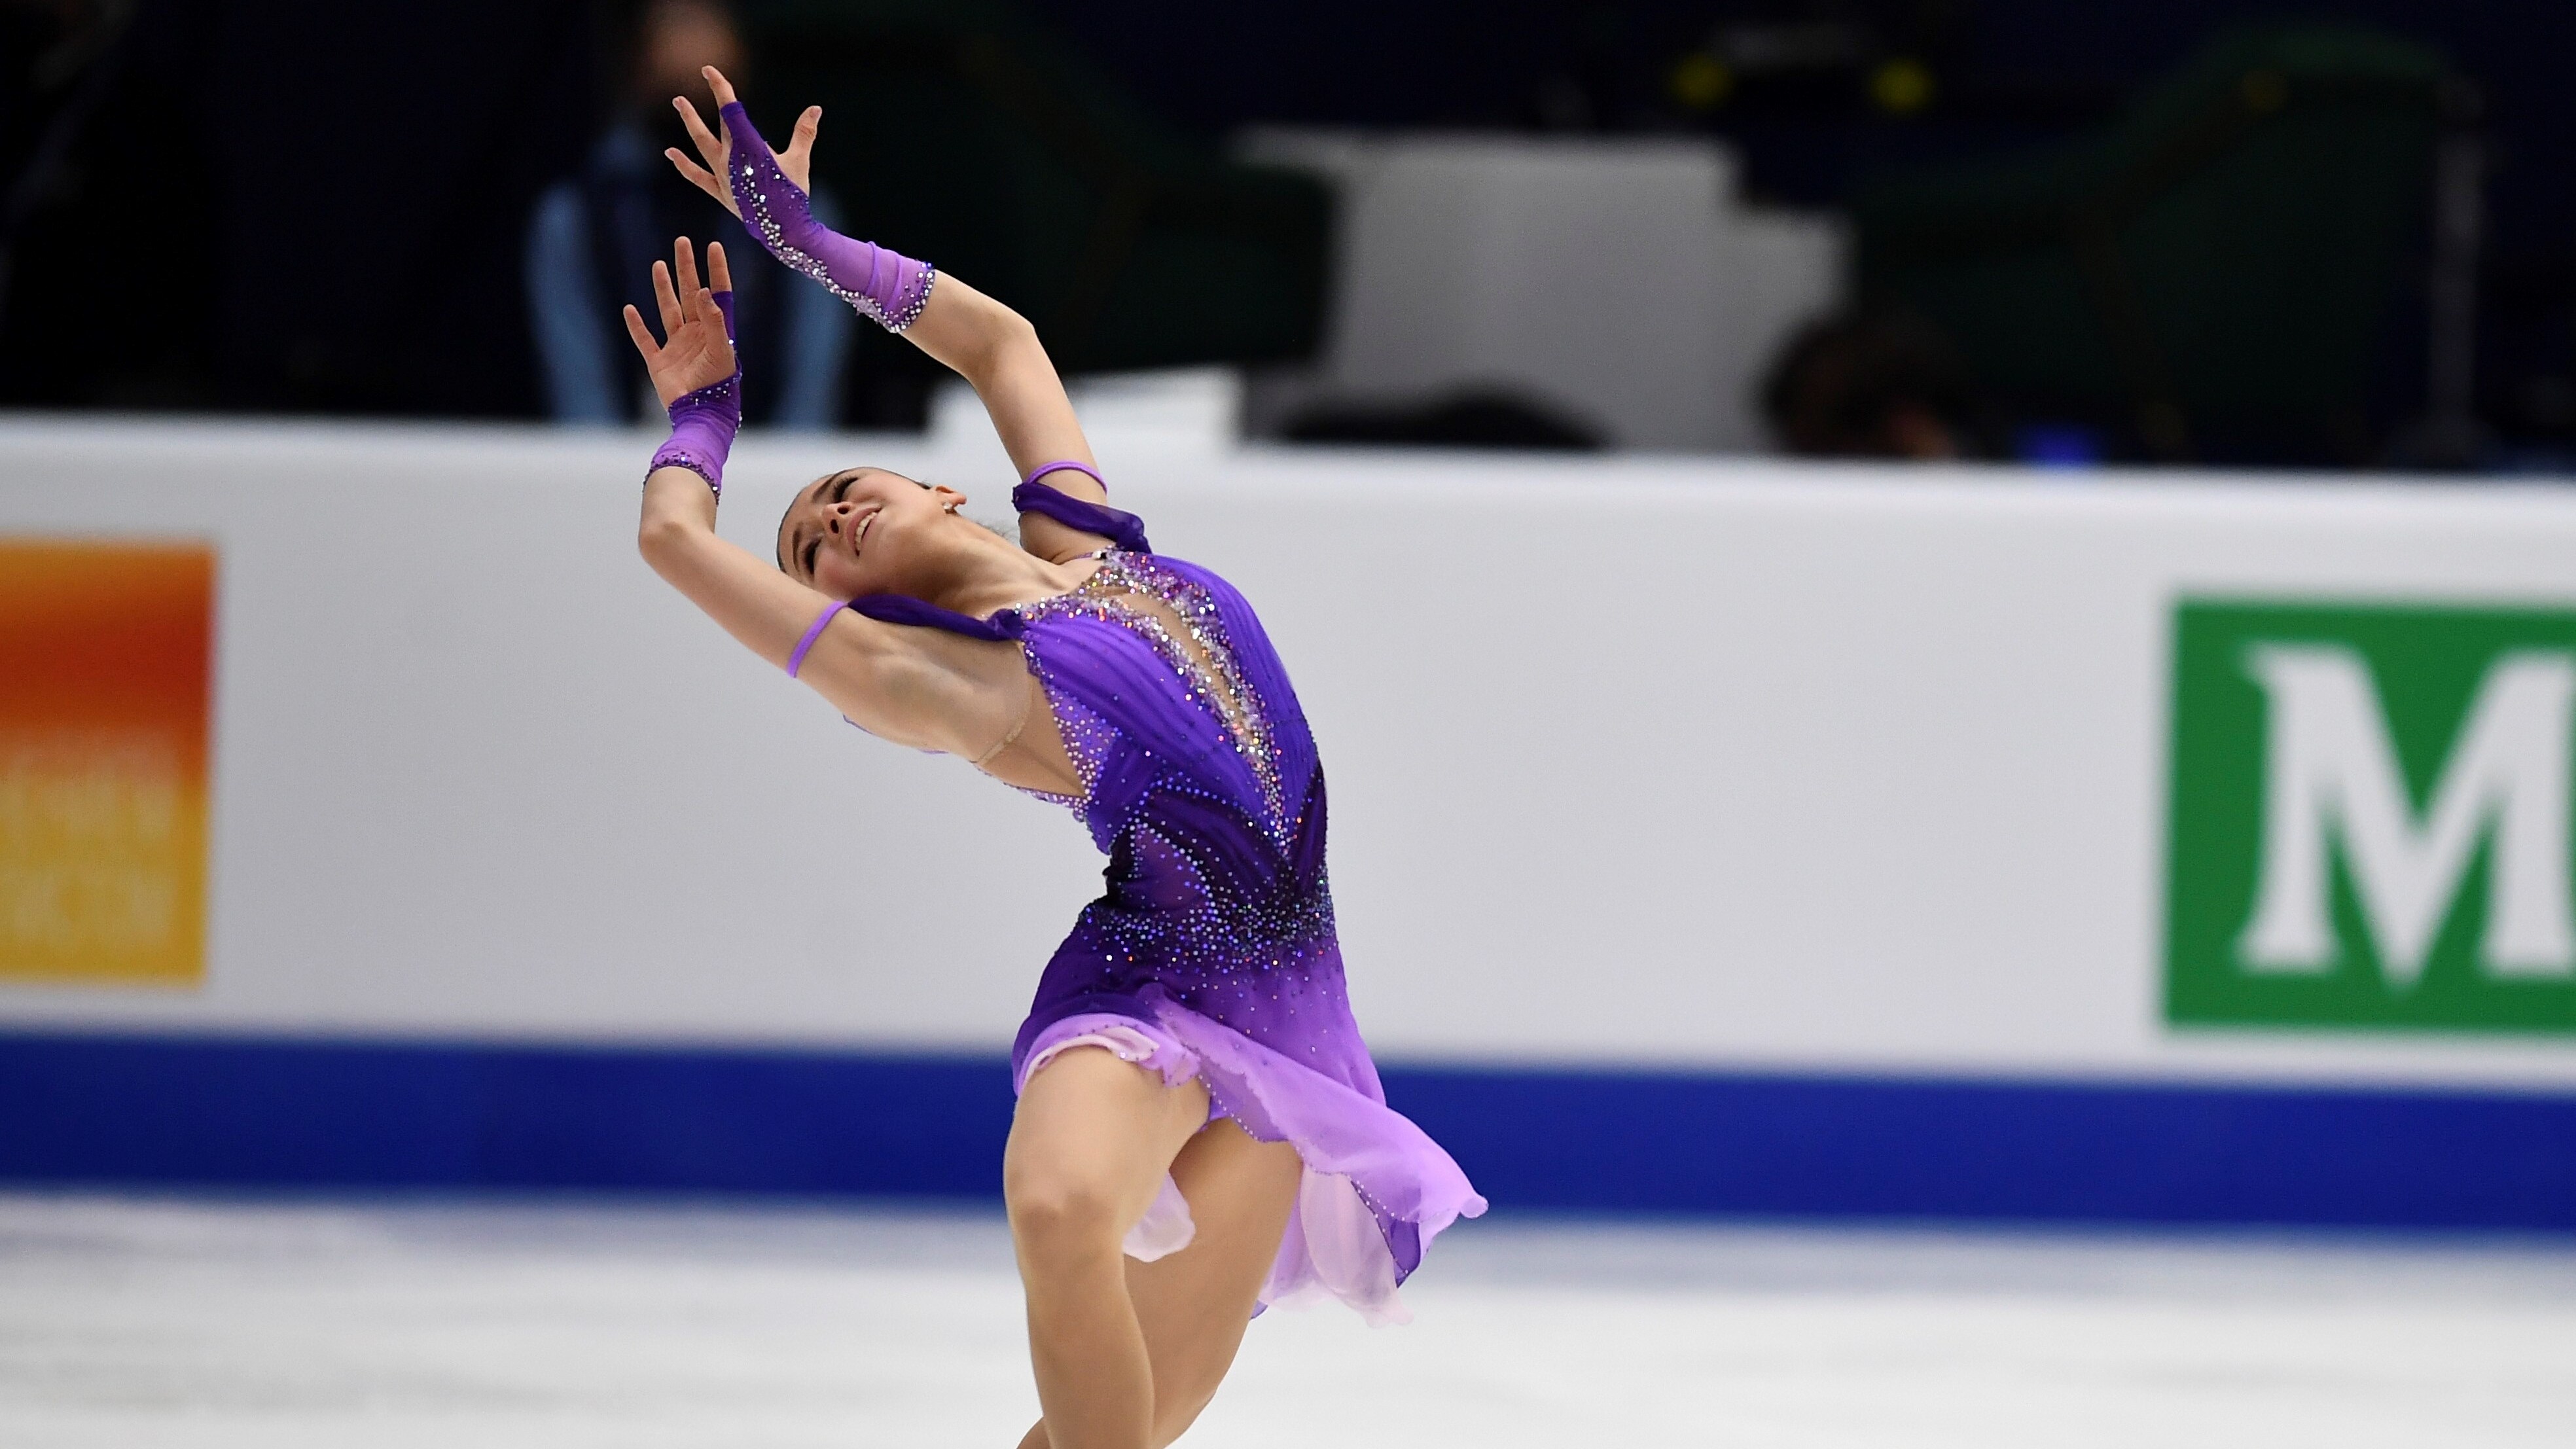 2022 European Figure Skating Championships results Russians sweep, Kamila Valieva first in free